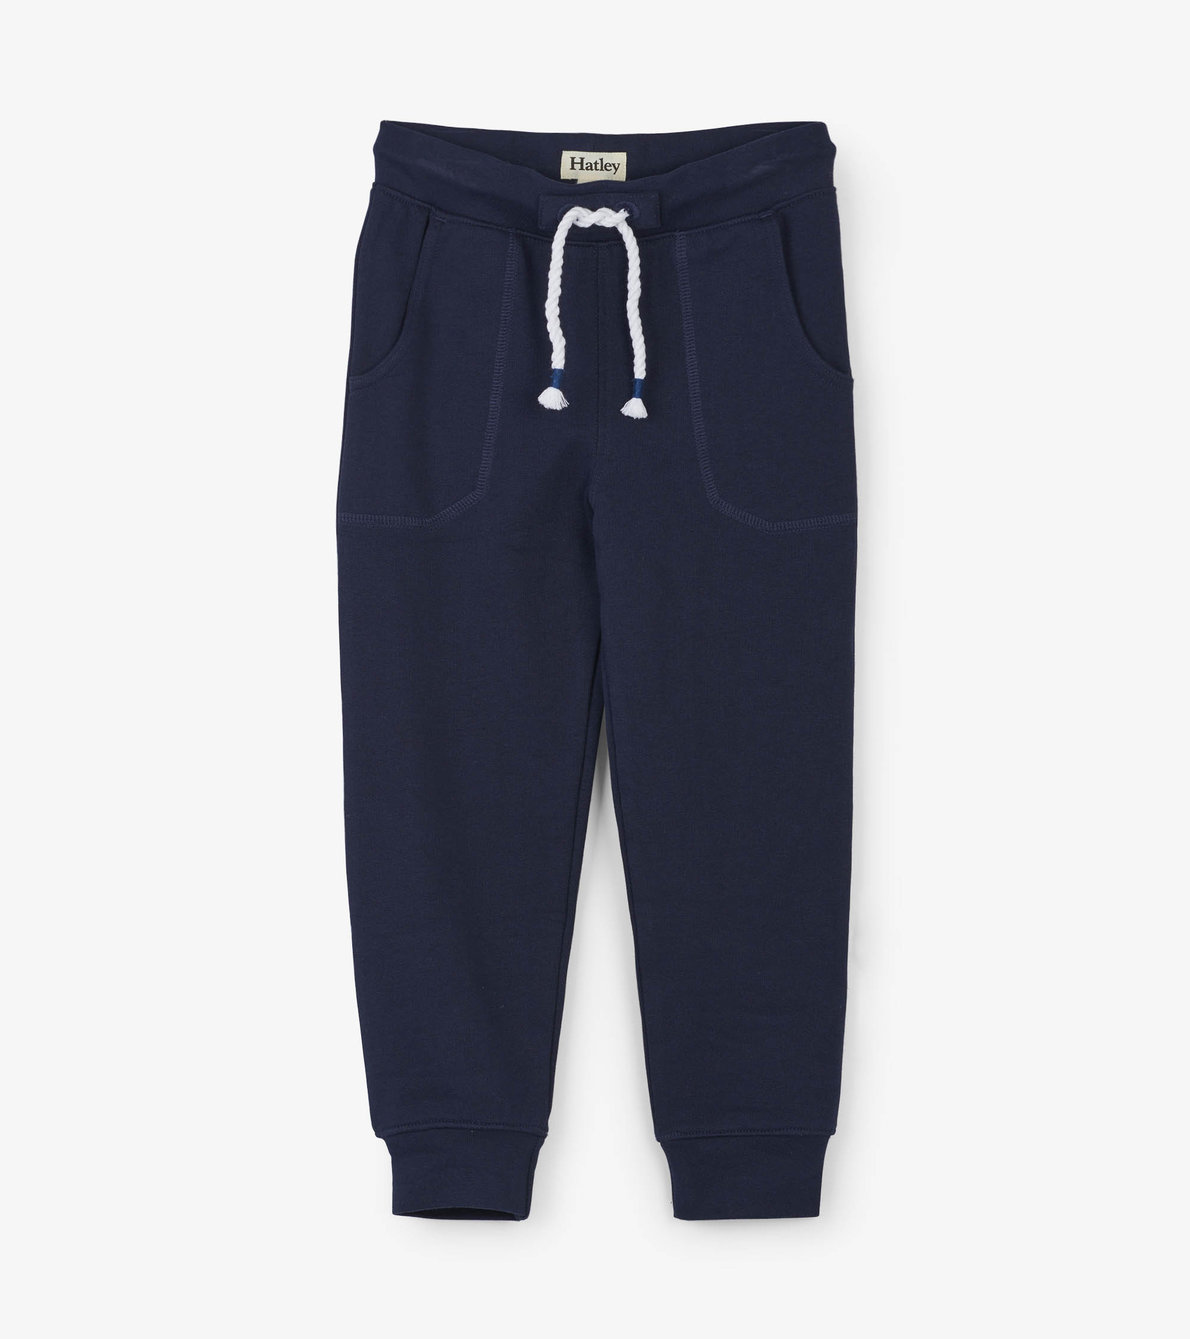 View larger image of Boys Navy Slim Fit Joggers